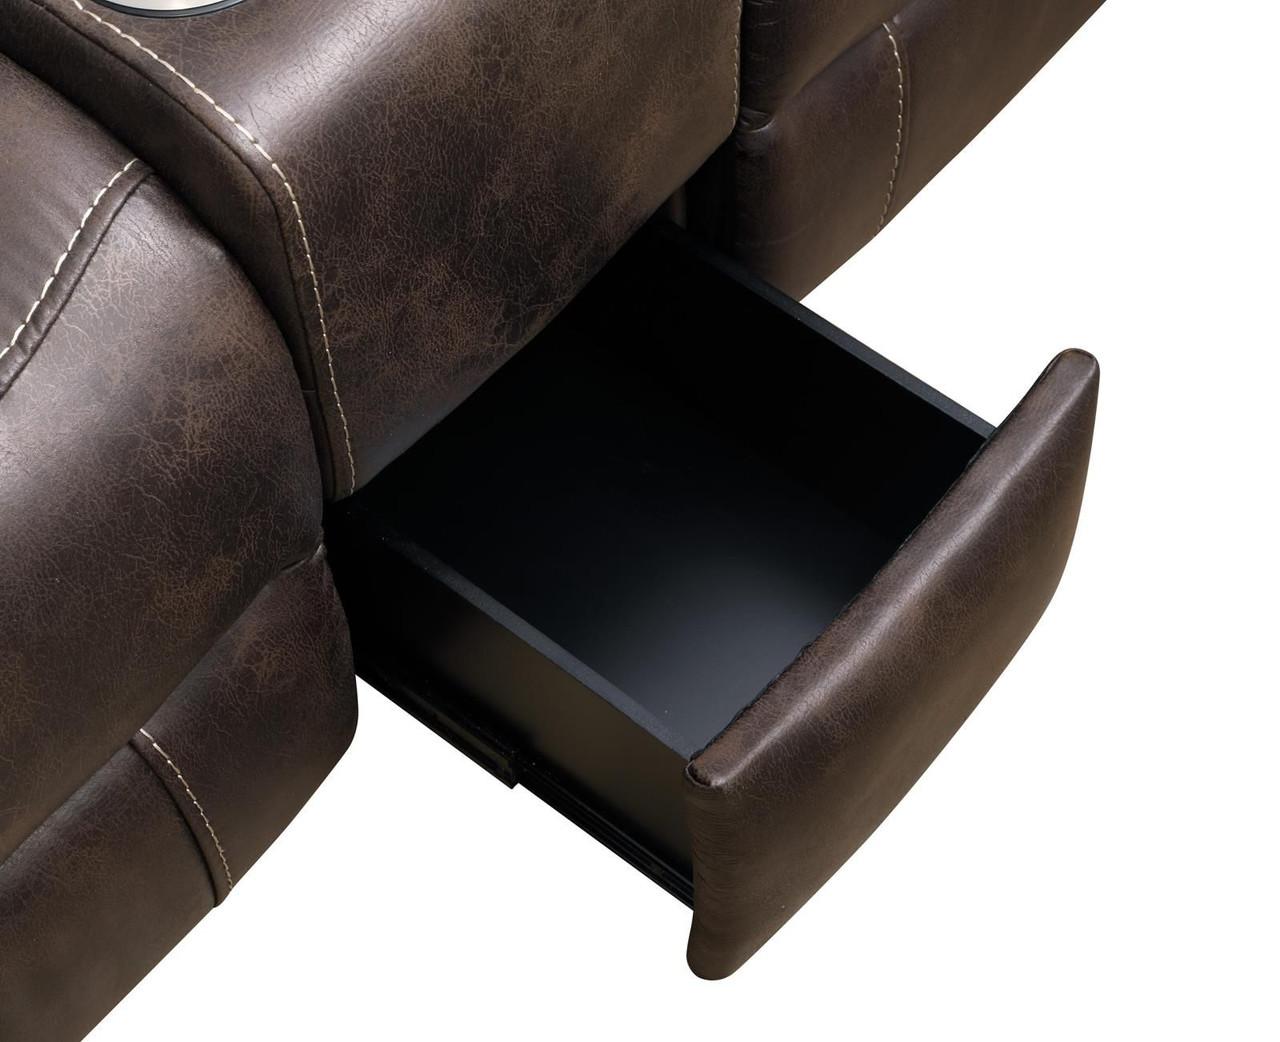 

    
Coaster 603511PP-S2 Wixom Power Living Room Set Brown 603511PP-S2
